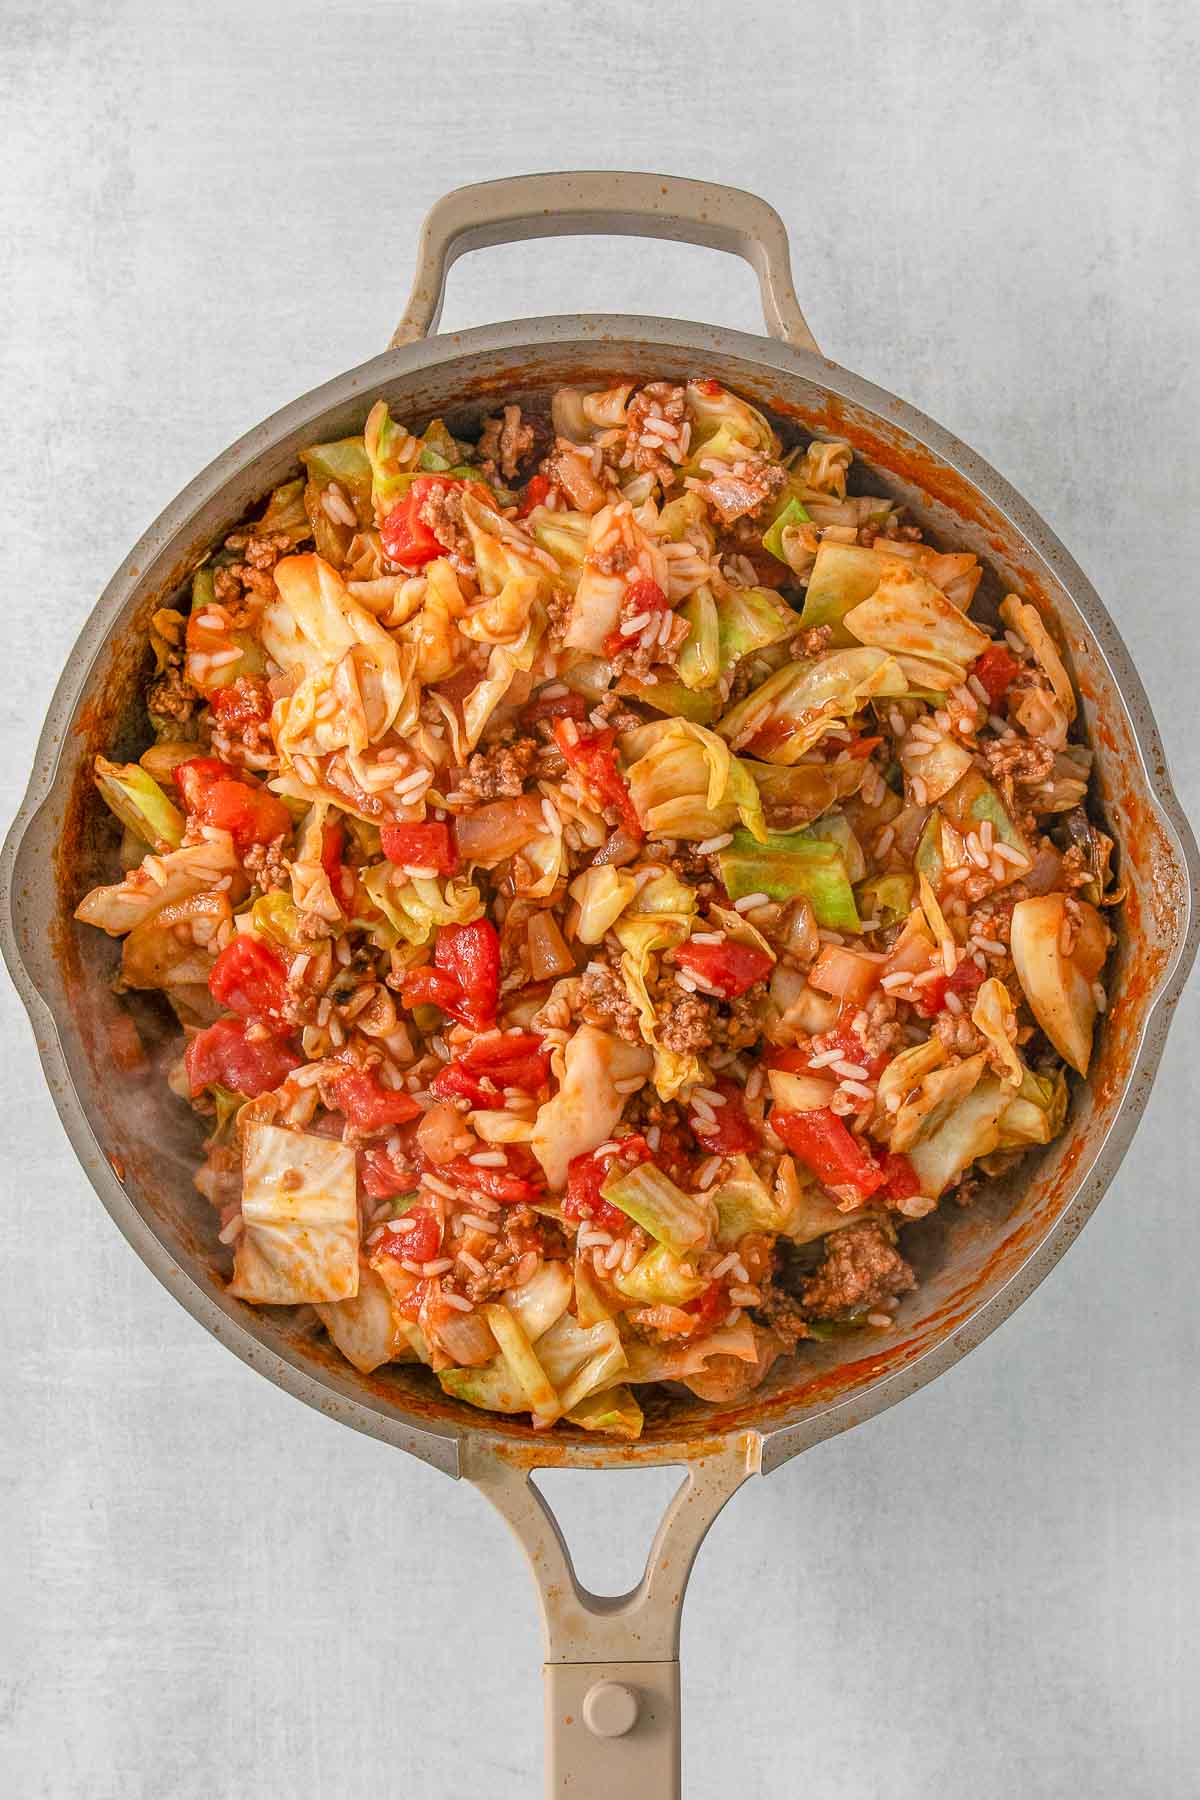 Sauteed cabbage and diced tomatoes in a skillet on a grey background.